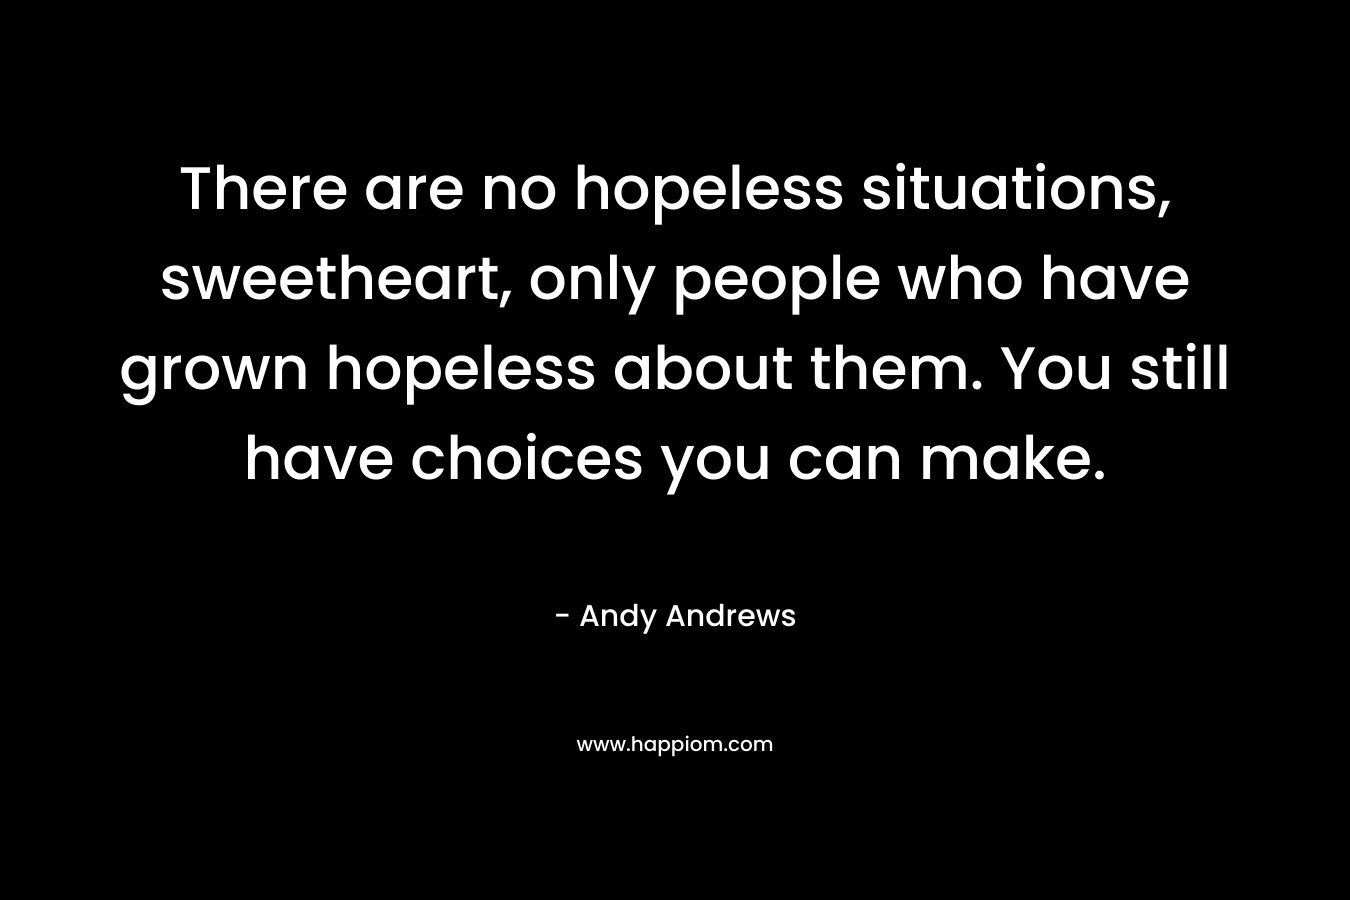 There are no hopeless situations, sweetheart, only people who have grown hopeless about them. You still have choices you can make. – Andy Andrews